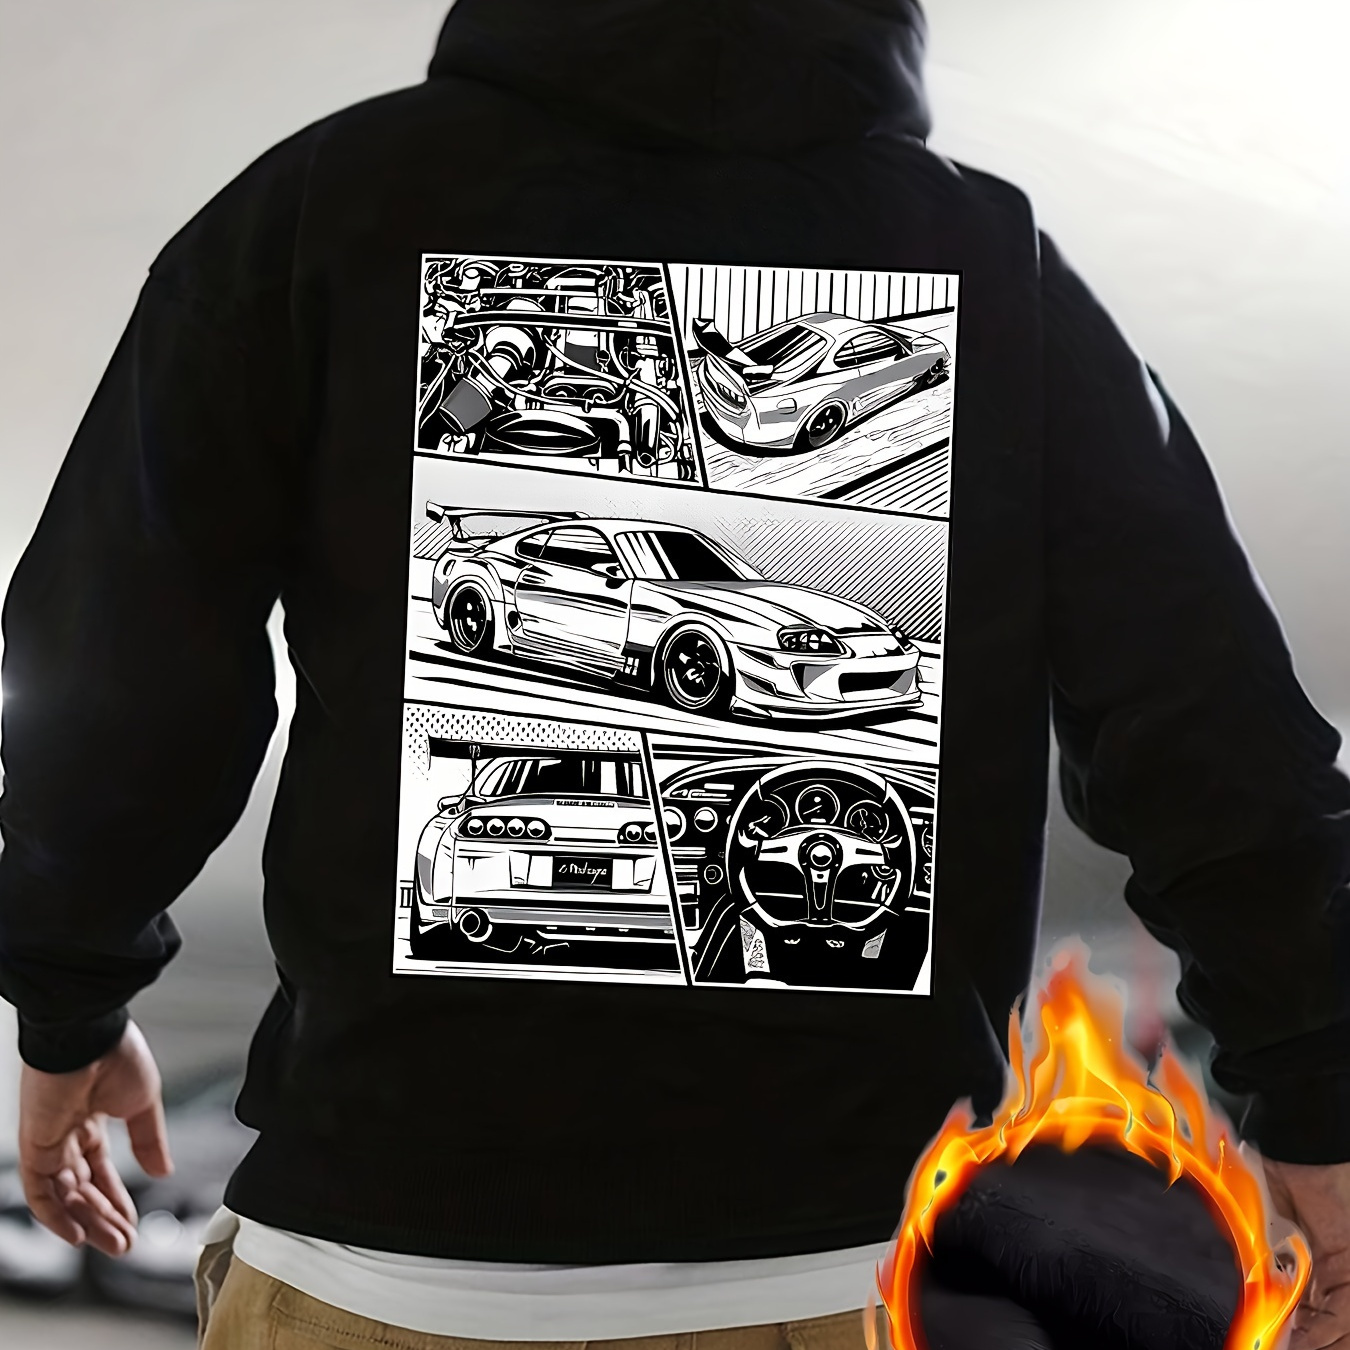 

Car Print Men's Pullover Round Neck Long Sleeve Hooded Sweatshirt Pattern Loose Casual Top For Autumn Winter Men's Clothing As Gifts